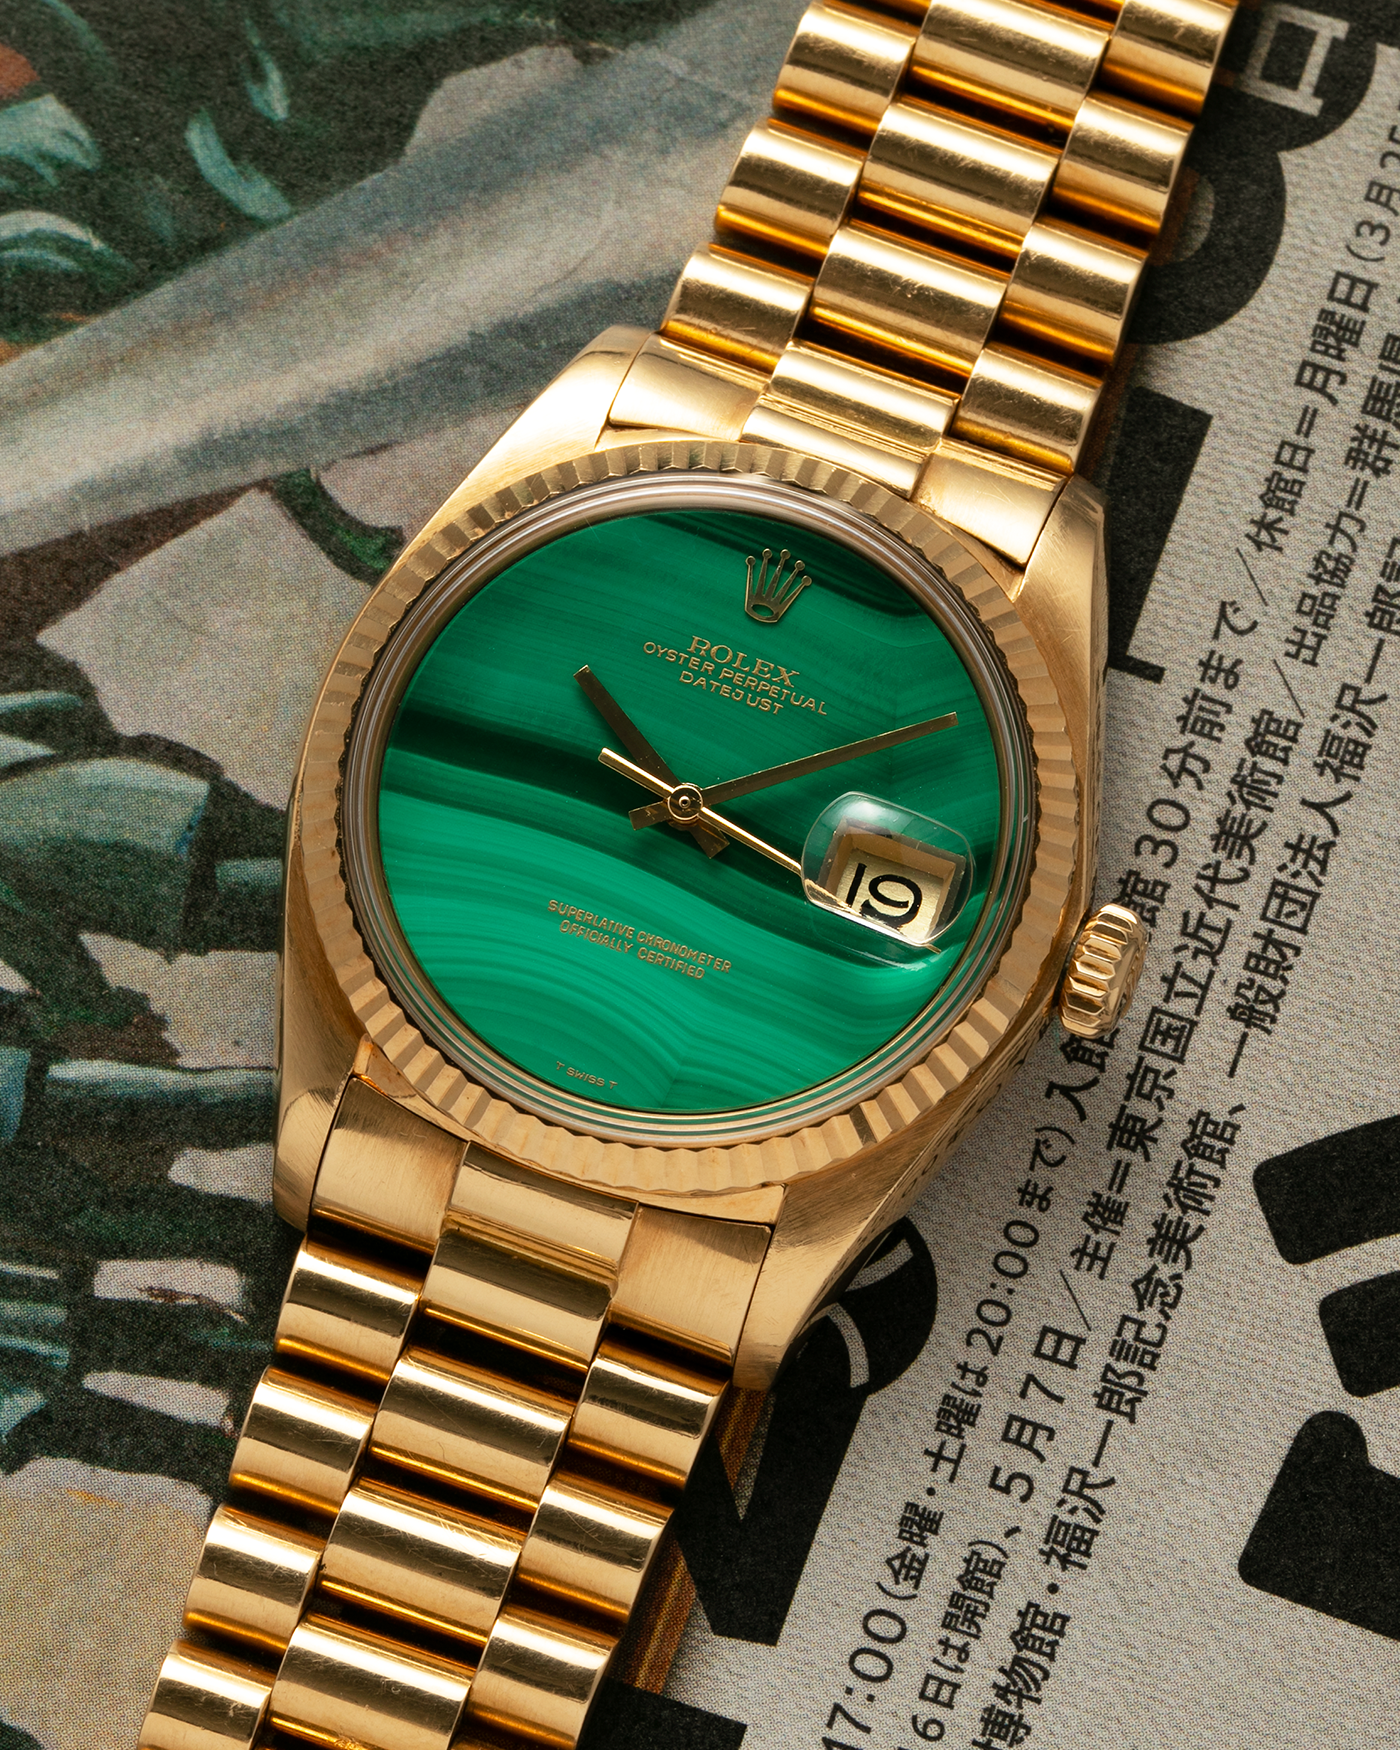 Brand: Rolex Year: 1976 Model: Datejust Reference Number: 1601 Serial Number: 420XXXX Material: 18-carat Yellow Gold, Malachite Stone Dial Movement: Rolex Cal. 1570, Self-Winding Case Diameter: 36mm Lug Width: 20mm Bracelet: Rolex Presidential Bracelet in 18-carat Yellow Gold with Signed Clasp